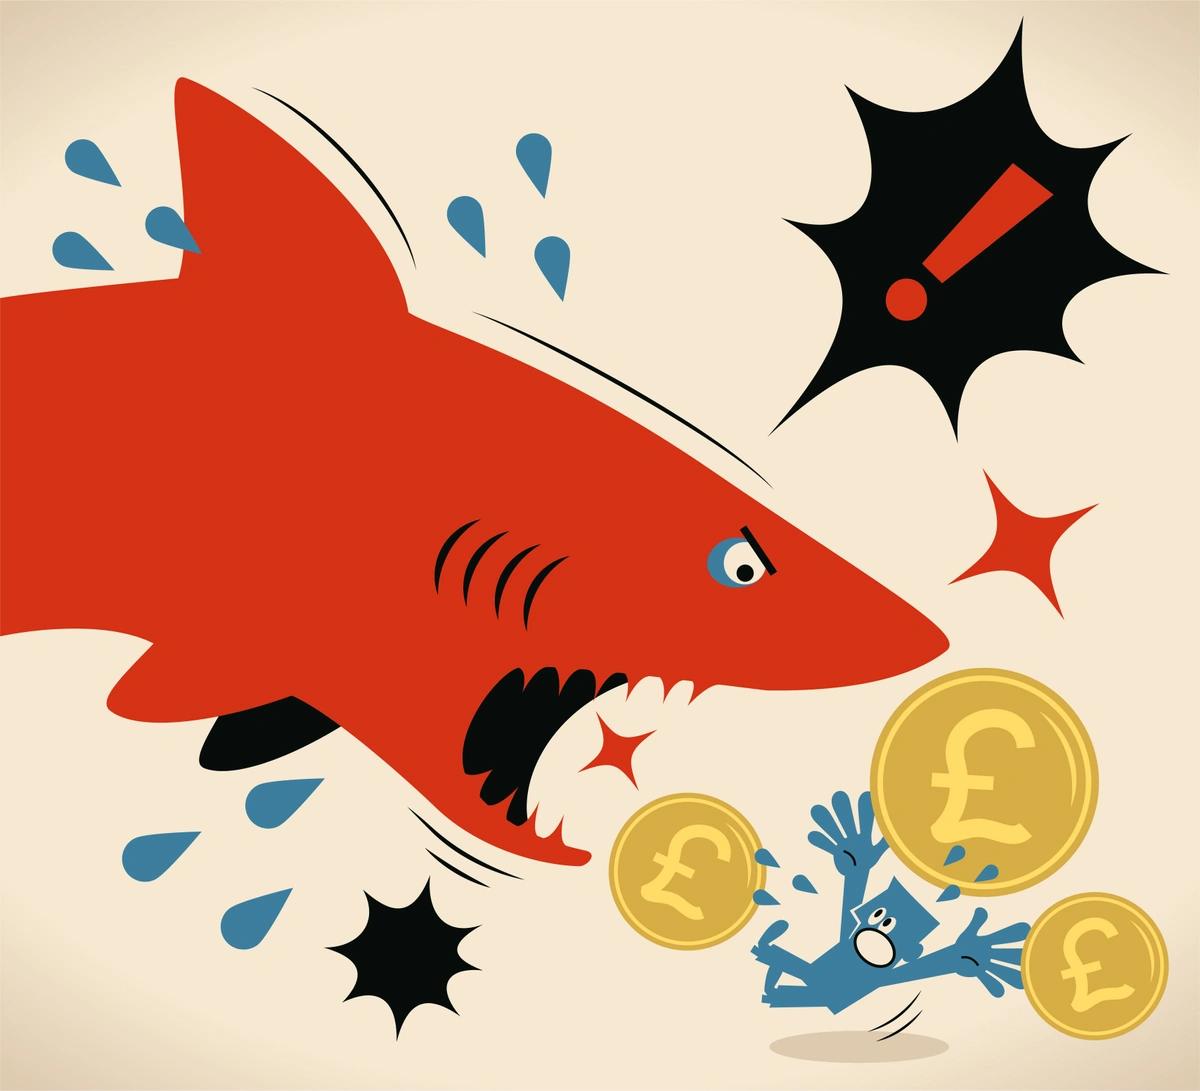 Illustration of a shark attacking a person surrounded by coins